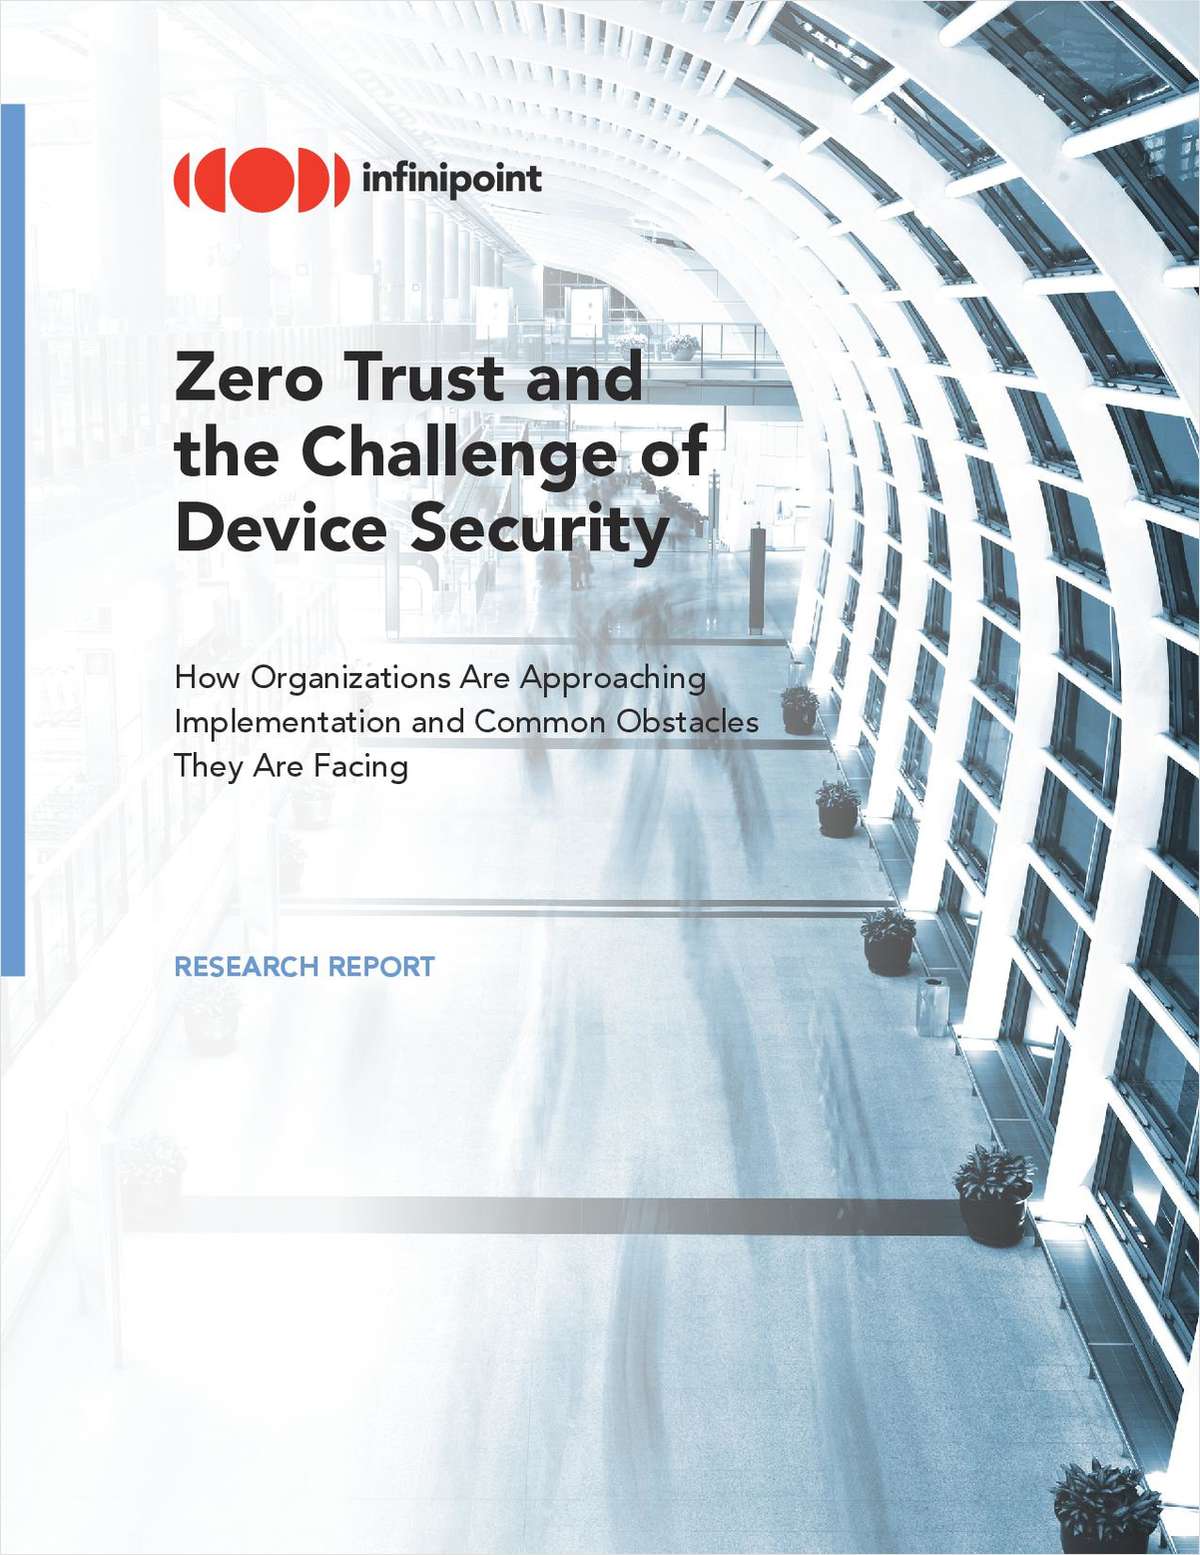 Zero Trust and the Challenge of Device Security